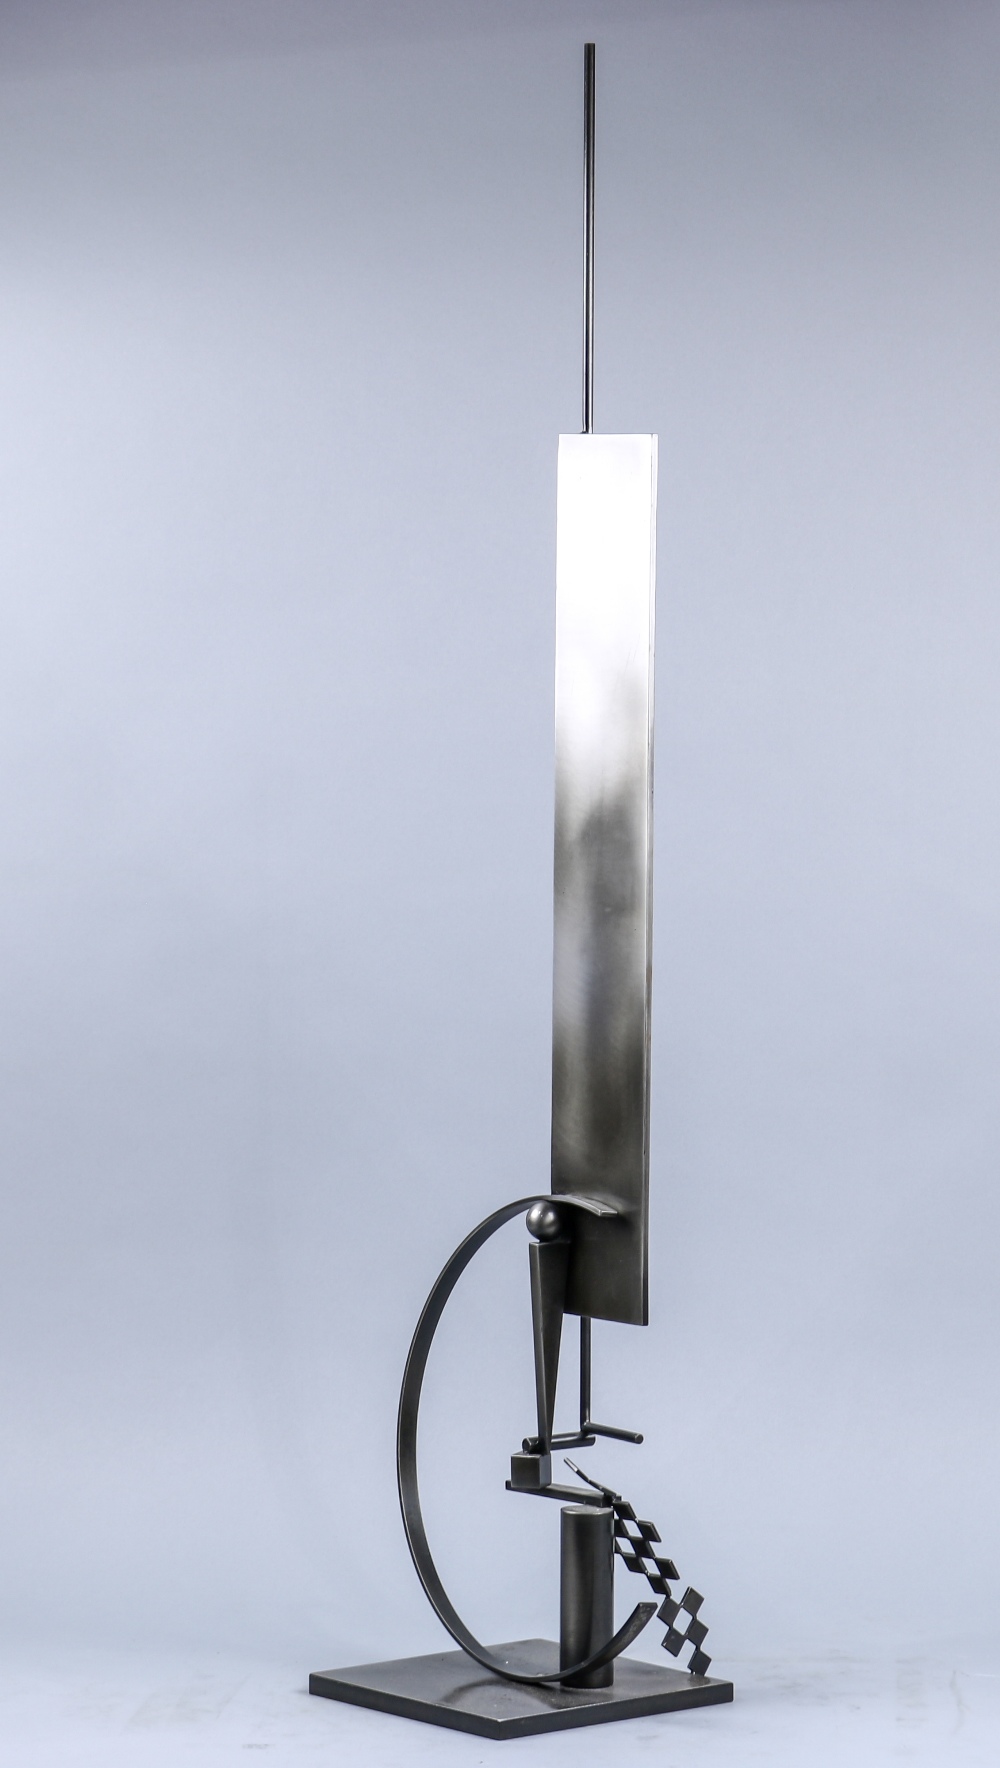 Fletcher Benton (American, b. 1931), Untitled, 2004, steel sculpture, signed and dated lower front, - Image 3 of 6